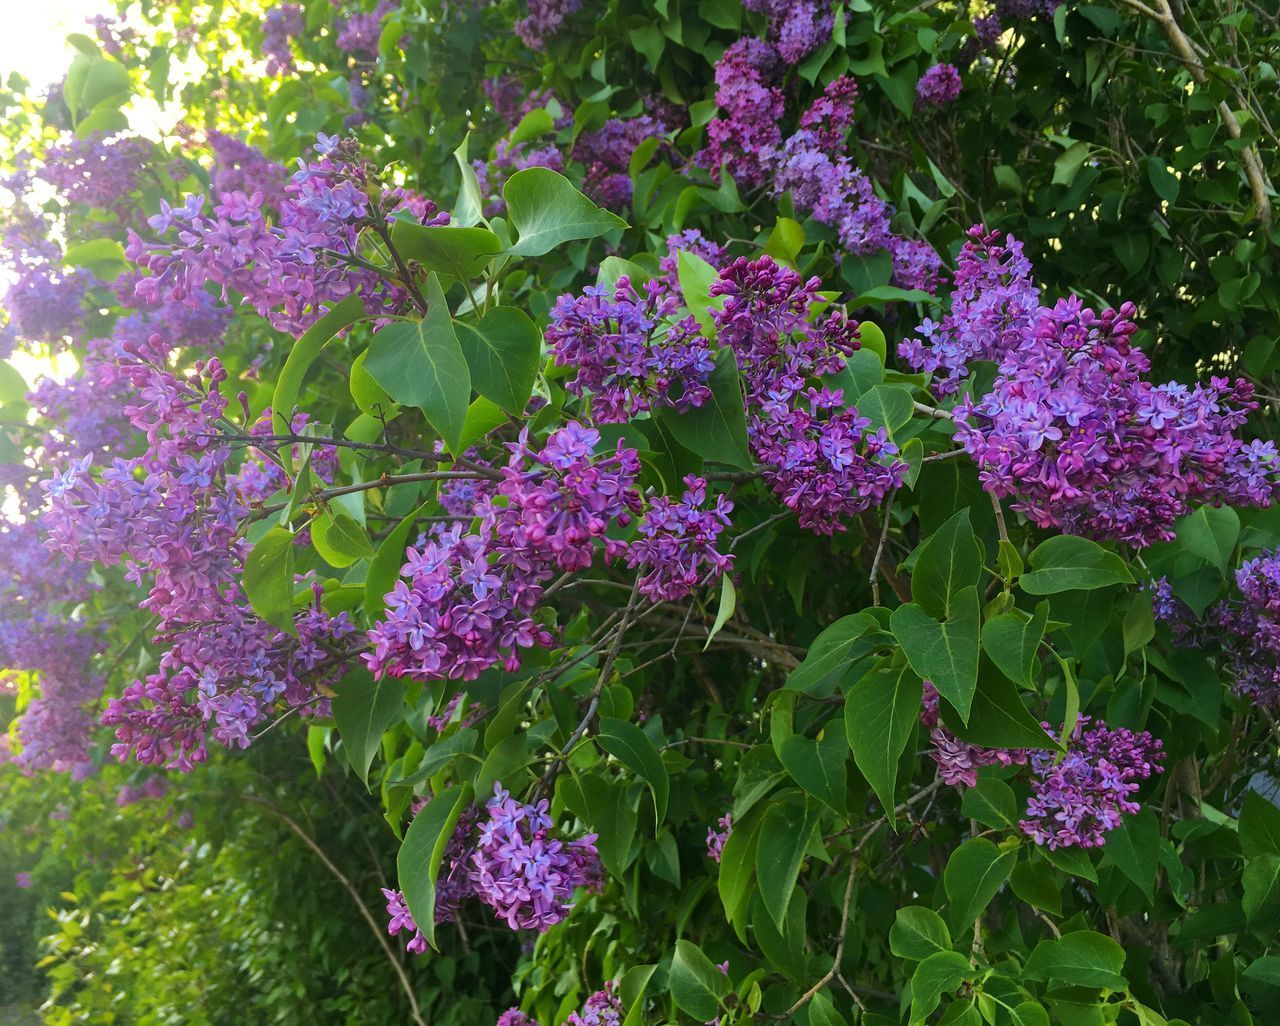 CLOSE-UP OF FRESH PURPLE FLOWERS IN PARK